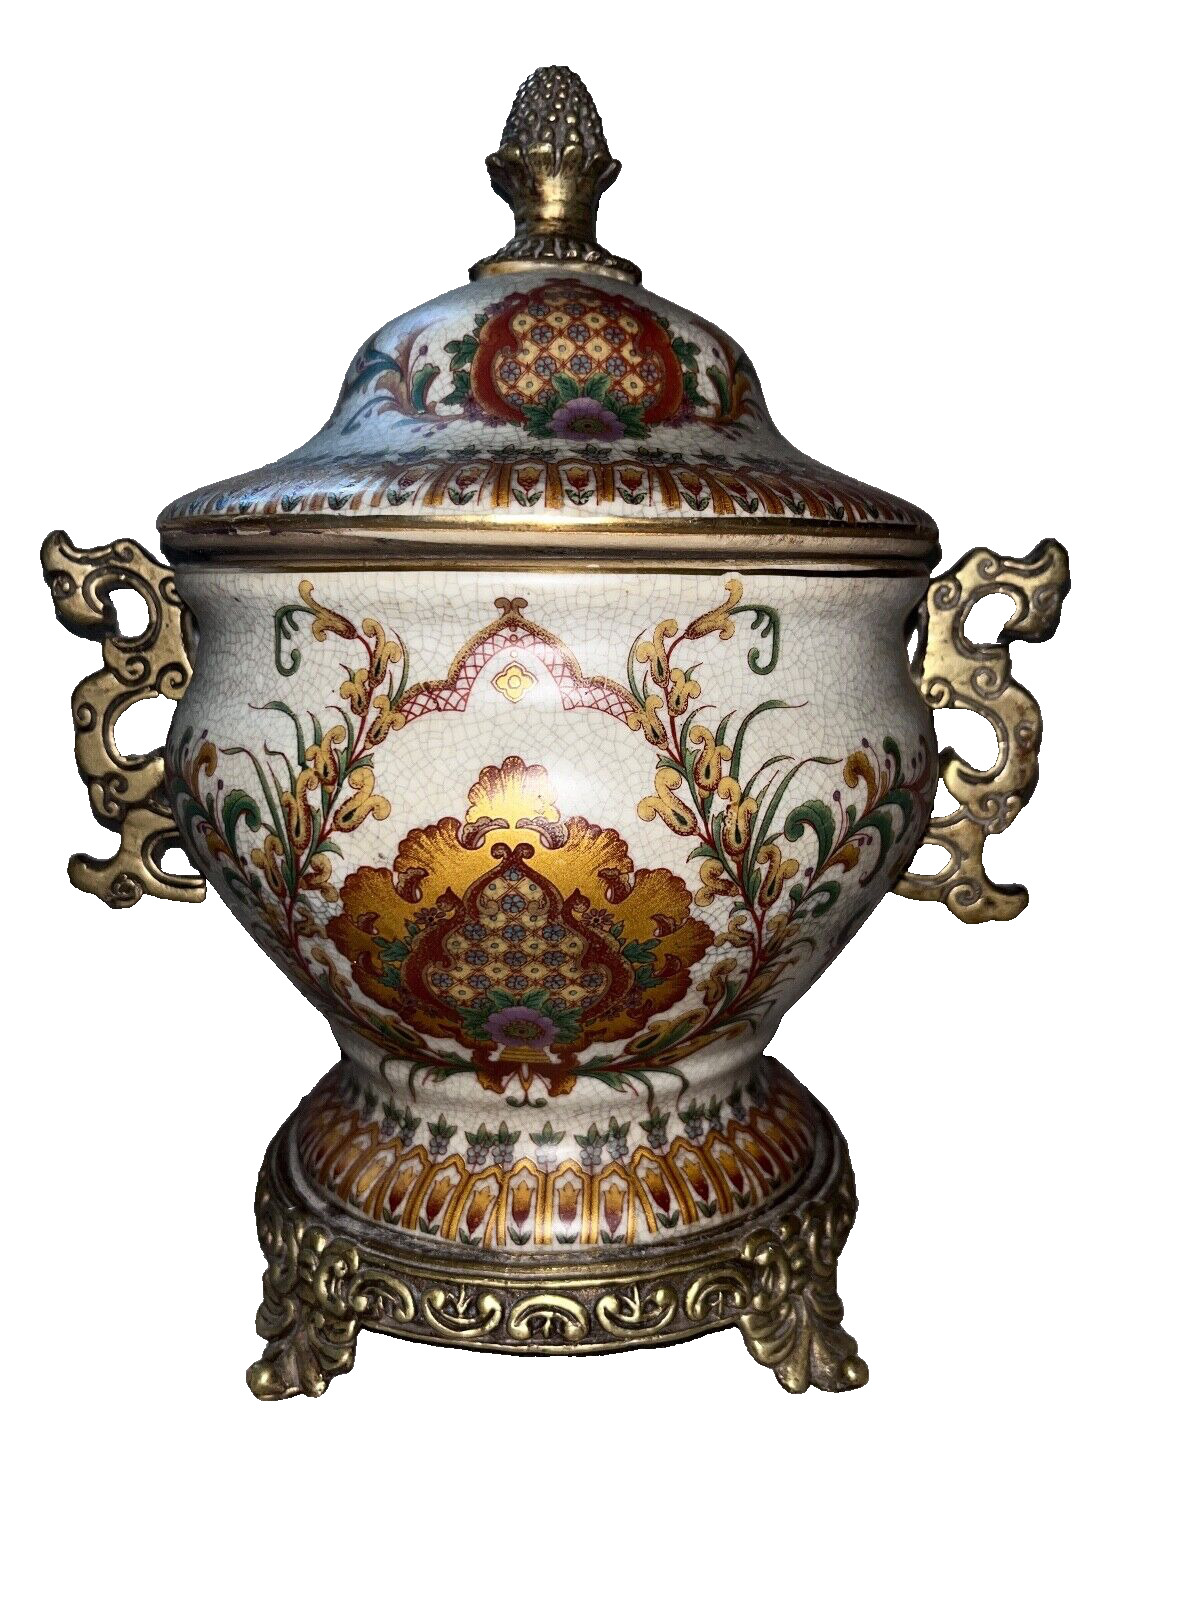 Ornate Decorative Porcelain and Bronze Urn with Lid Decorative Handles Asian